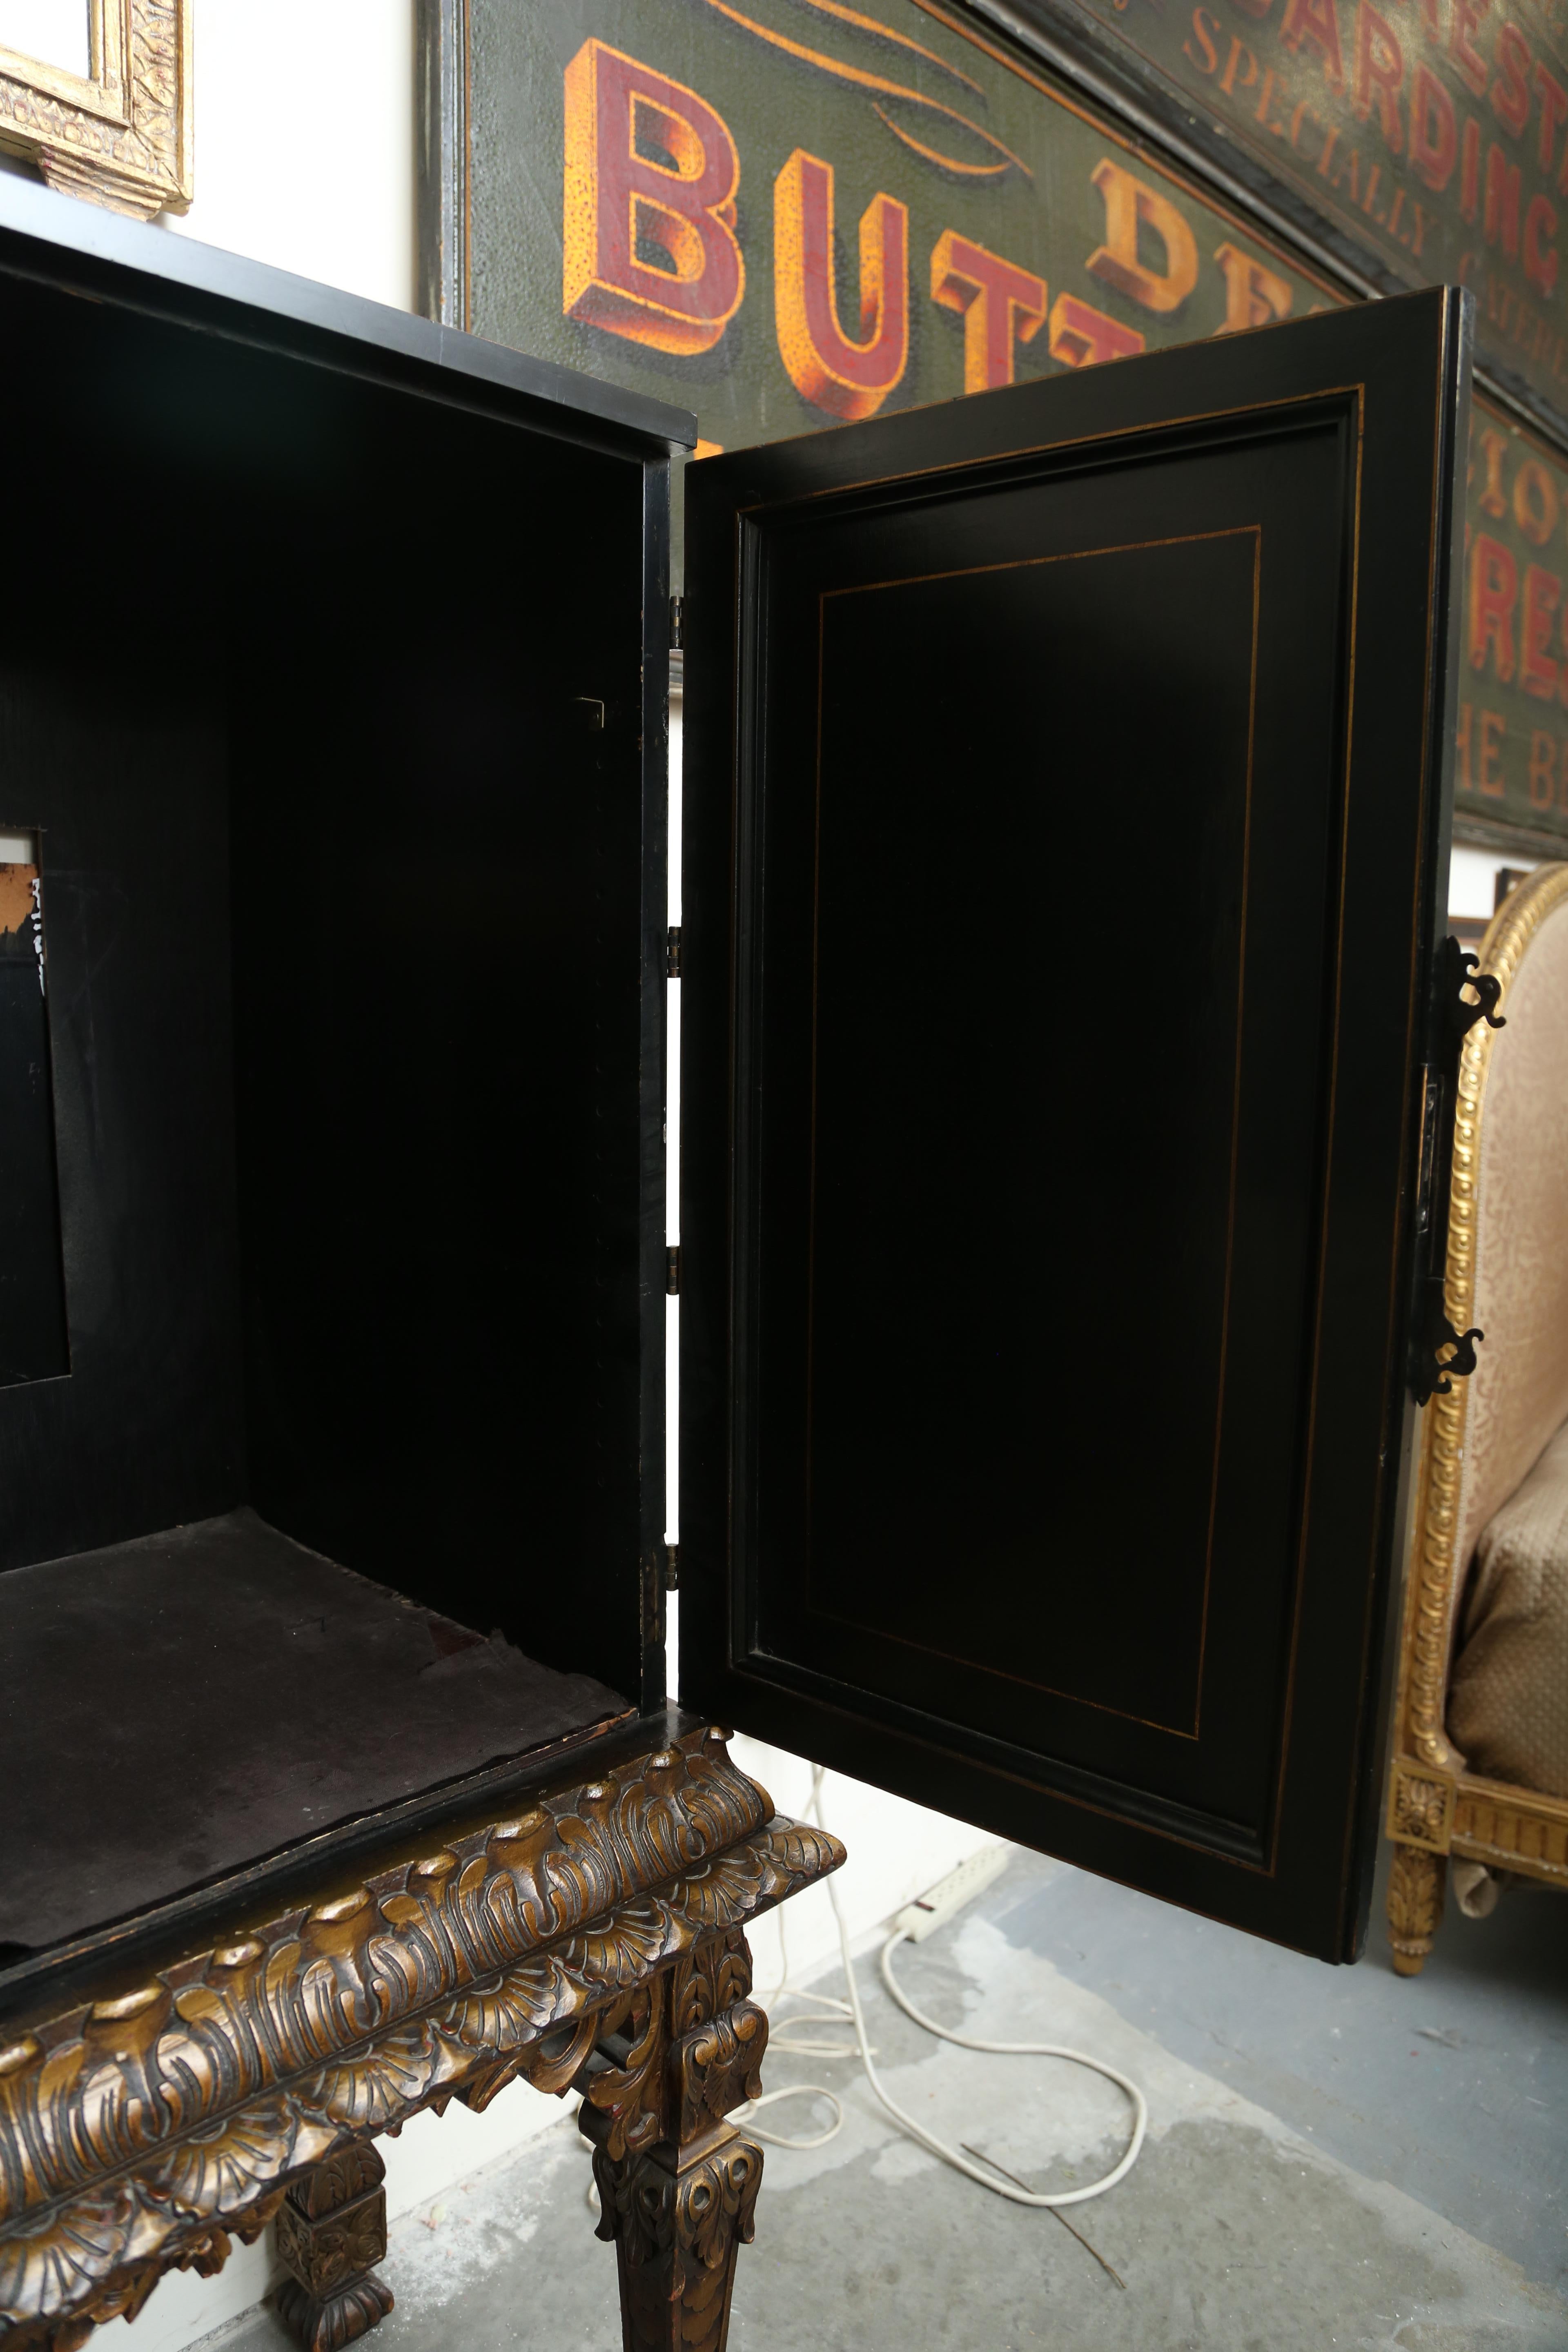 Chinoiserie two-door black lacquer cabinet with raised gilt and lacquer decorations. Engraved bass hardware and hinges with original key. The cabinet rests on a carved gilt stand. The interior could be fitted with a mirrored back and glass shelves